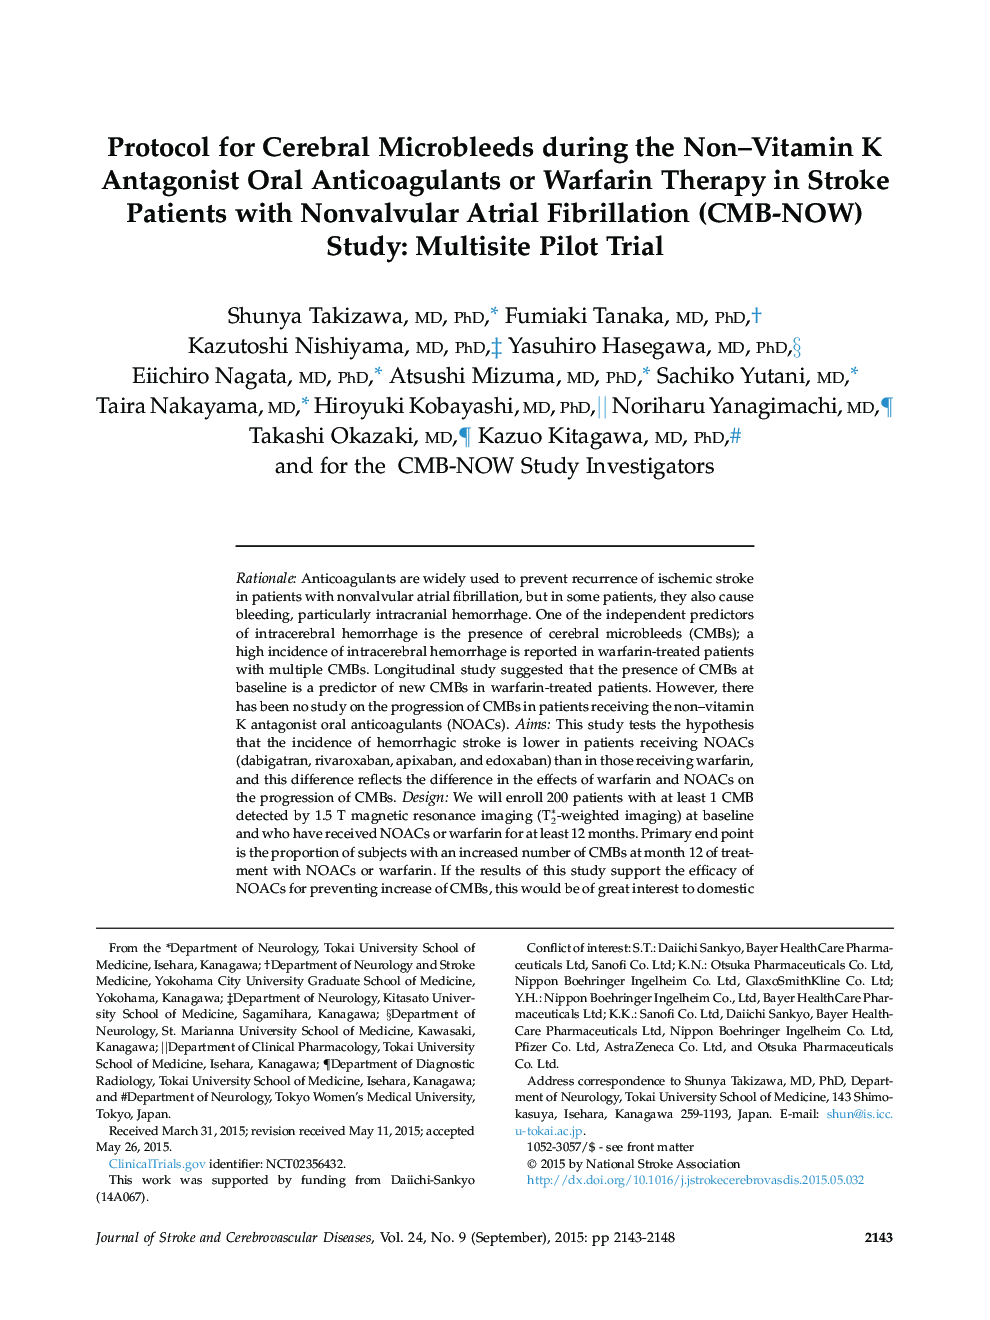 Protocol for Cerebral Microbleeds during the Non–Vitamin K Antagonist Oral Anticoagulants or Warfarin Therapy in Stroke Patients with Nonvalvular Atrial Fibrillation (CMB-NOW) Study: Multisite Pilot Trial 